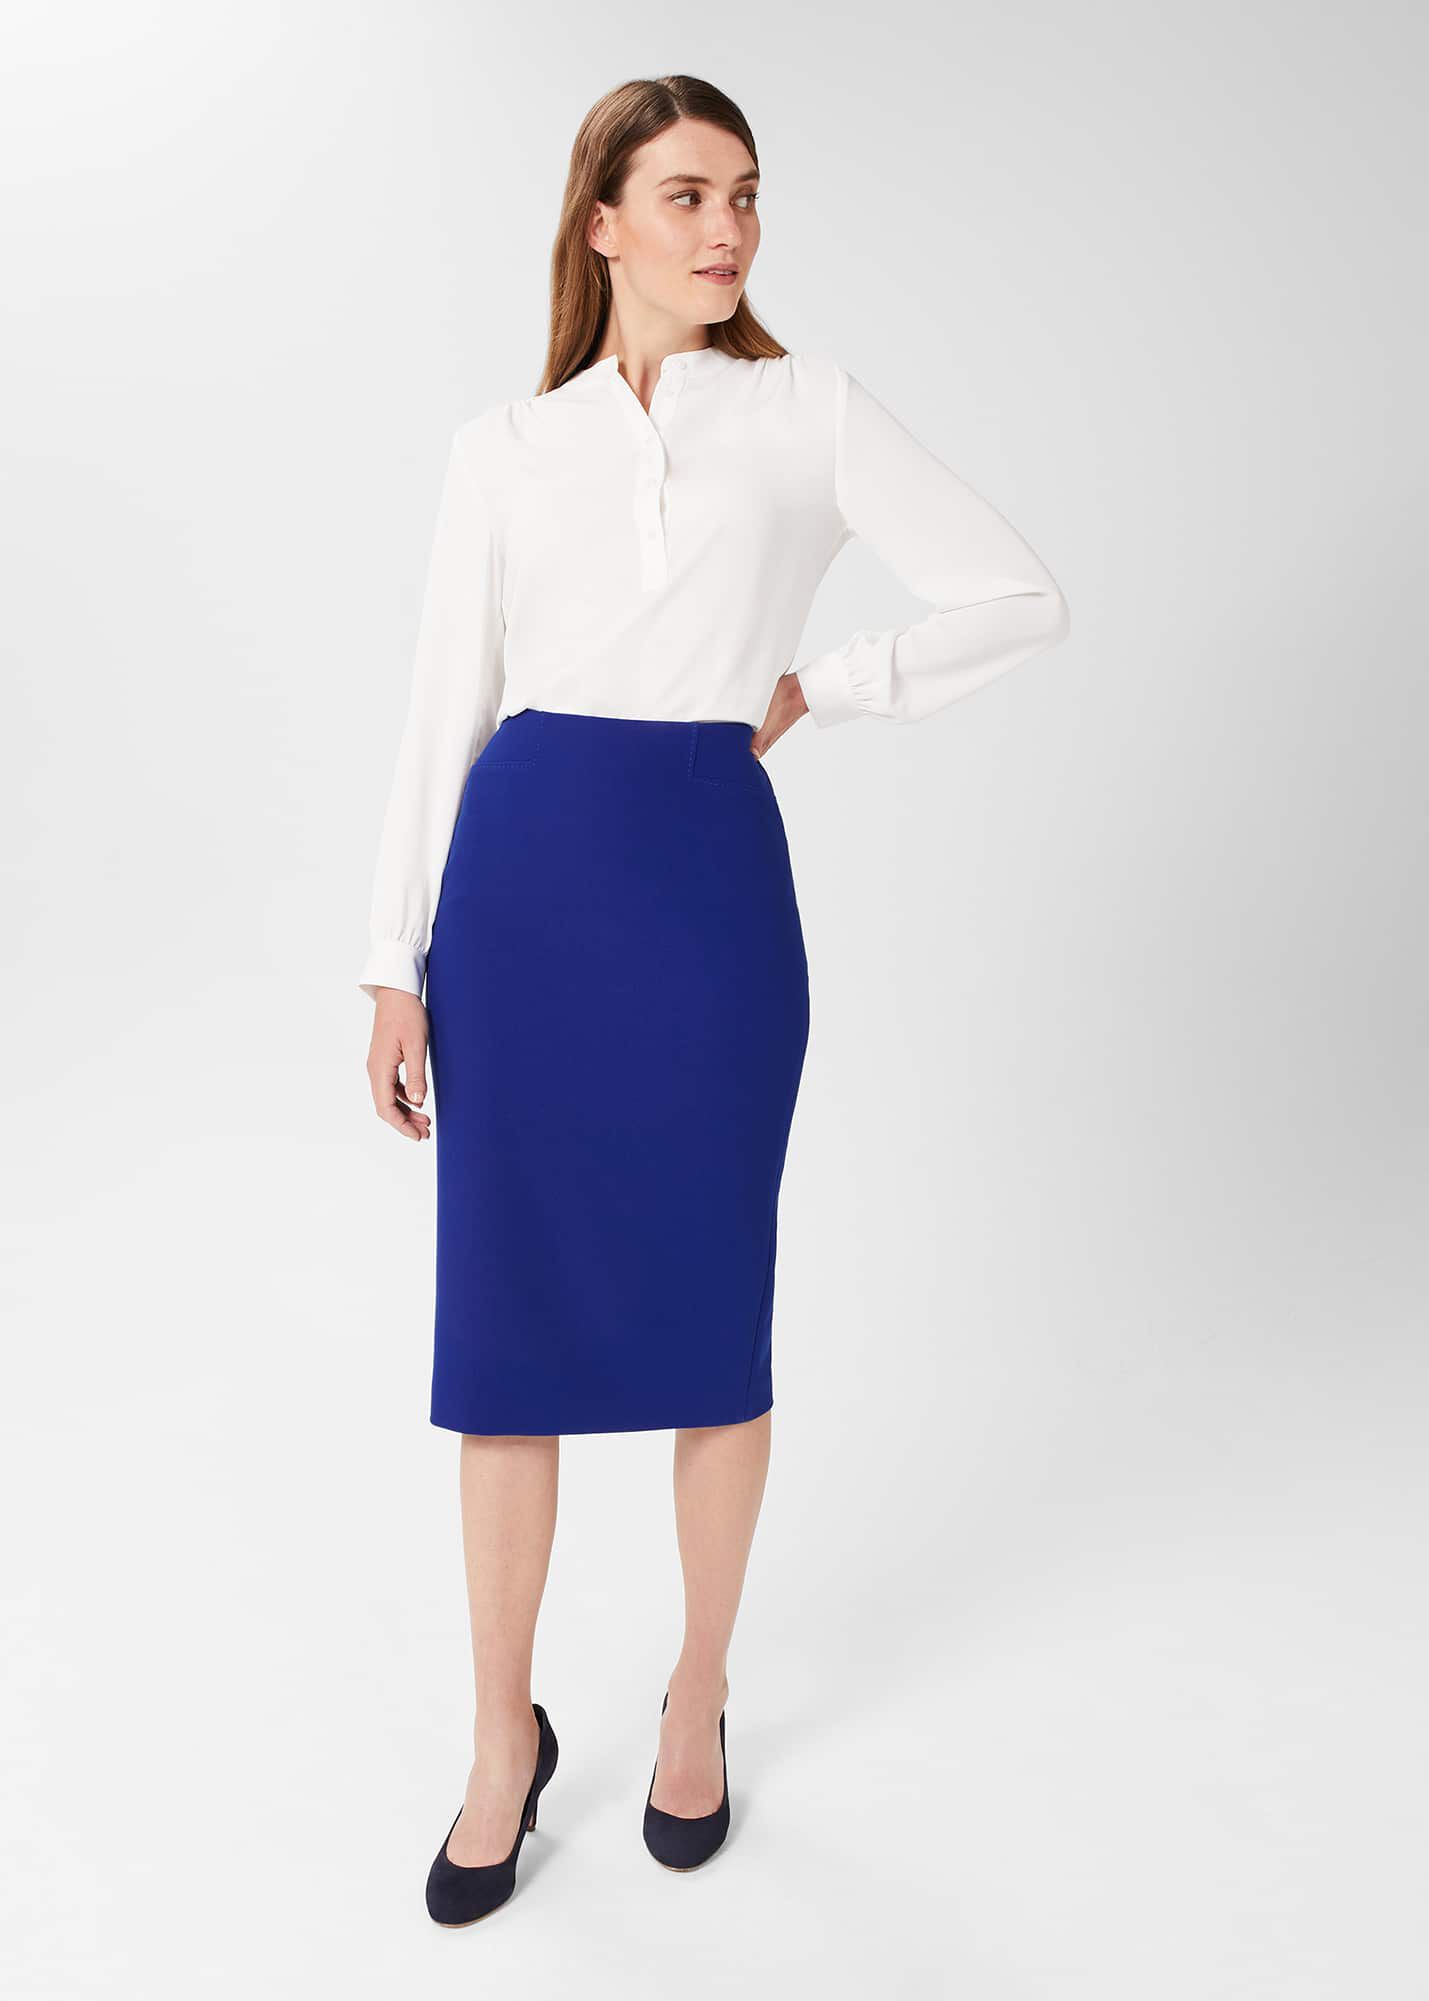 Work Skirts  Shop The Largest Collection  ShopStyle UK